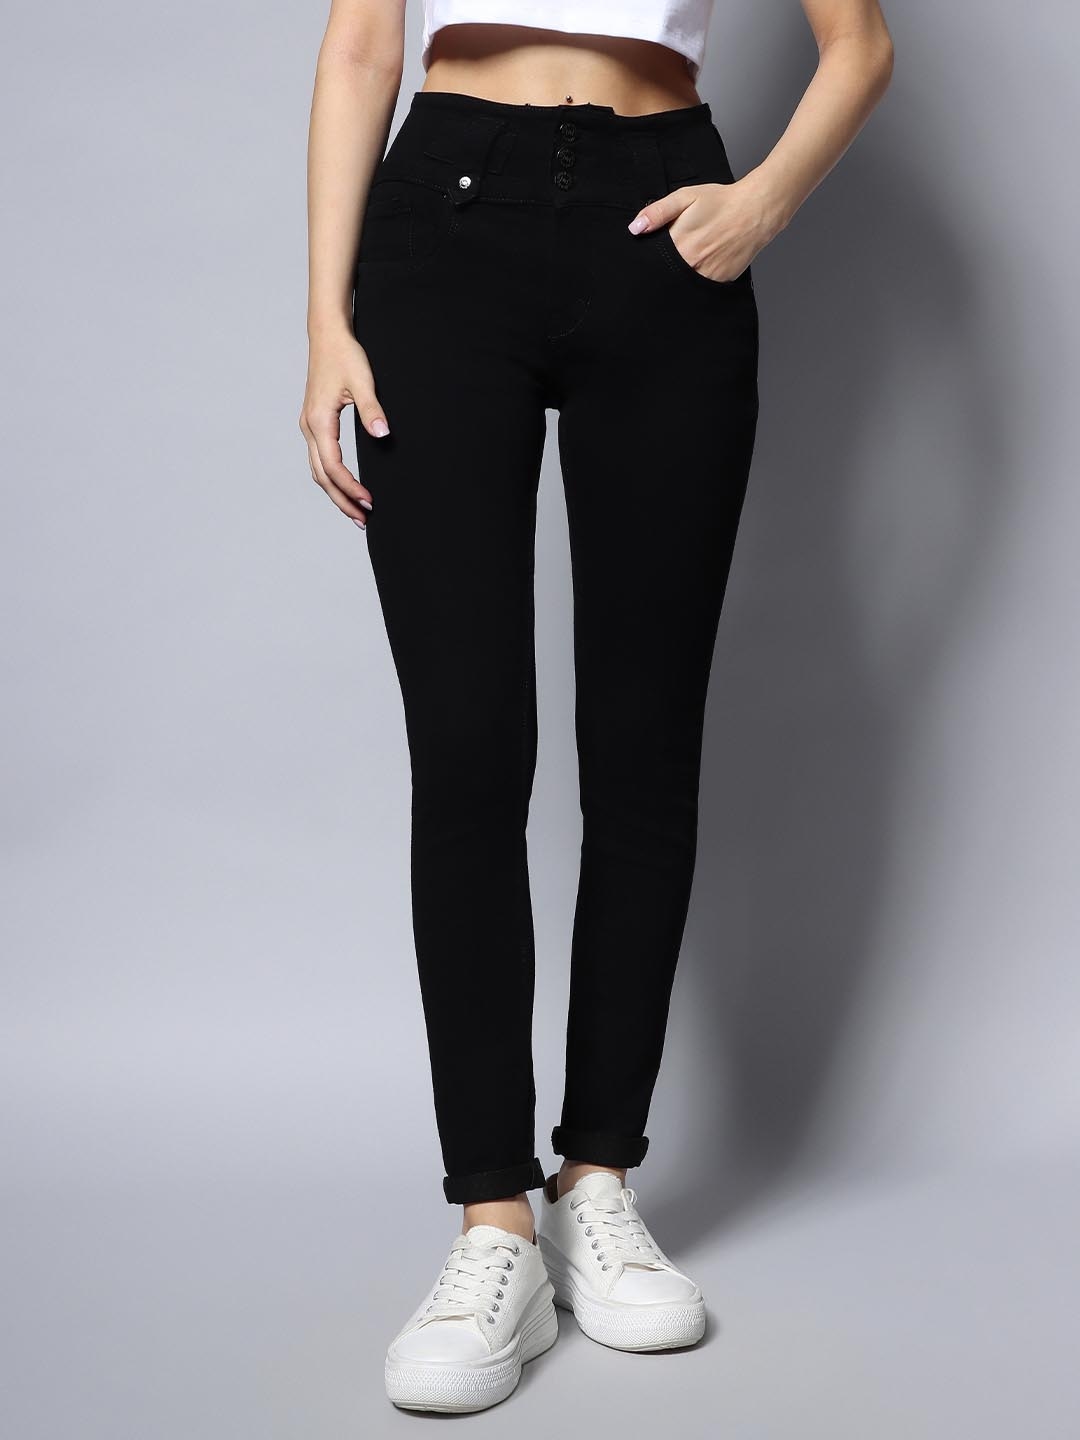 Details more than 102 womens black high waisted jeans